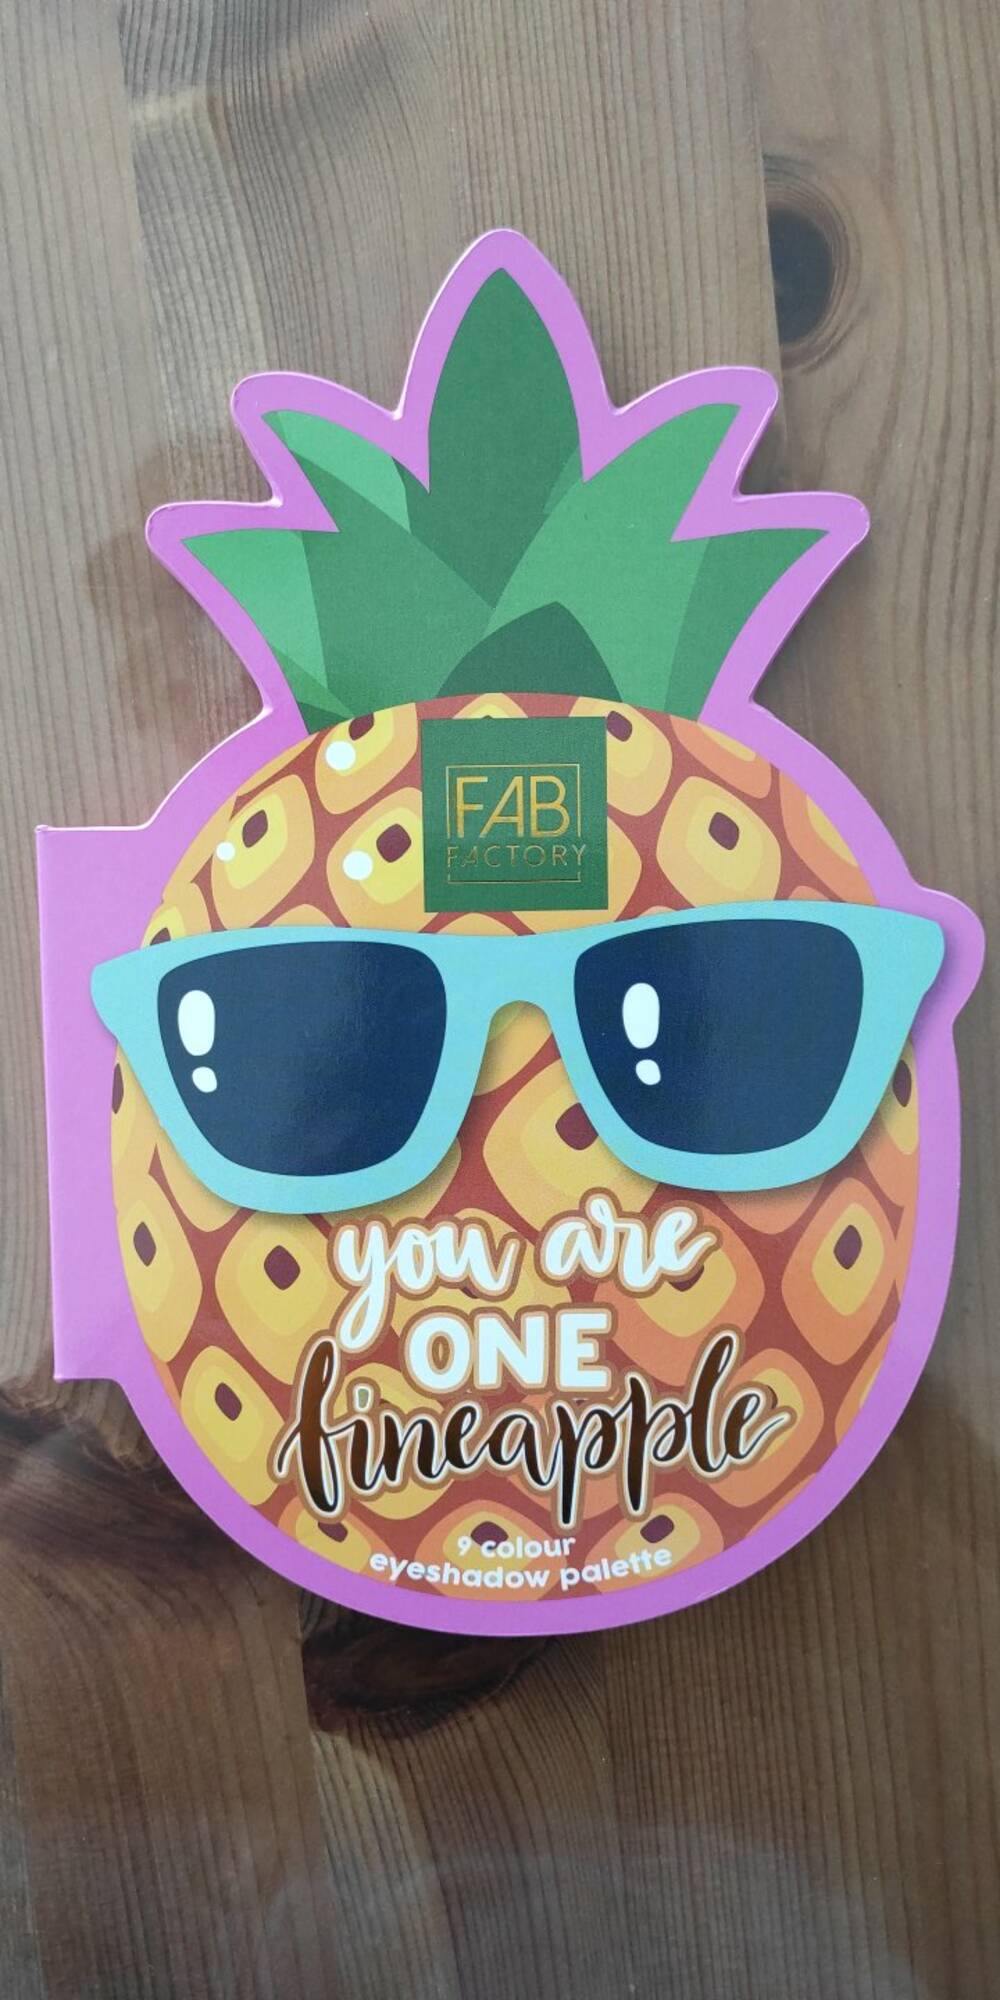 FAB FACTORY - You are one pineapple - 9 colour eyeshadow palette